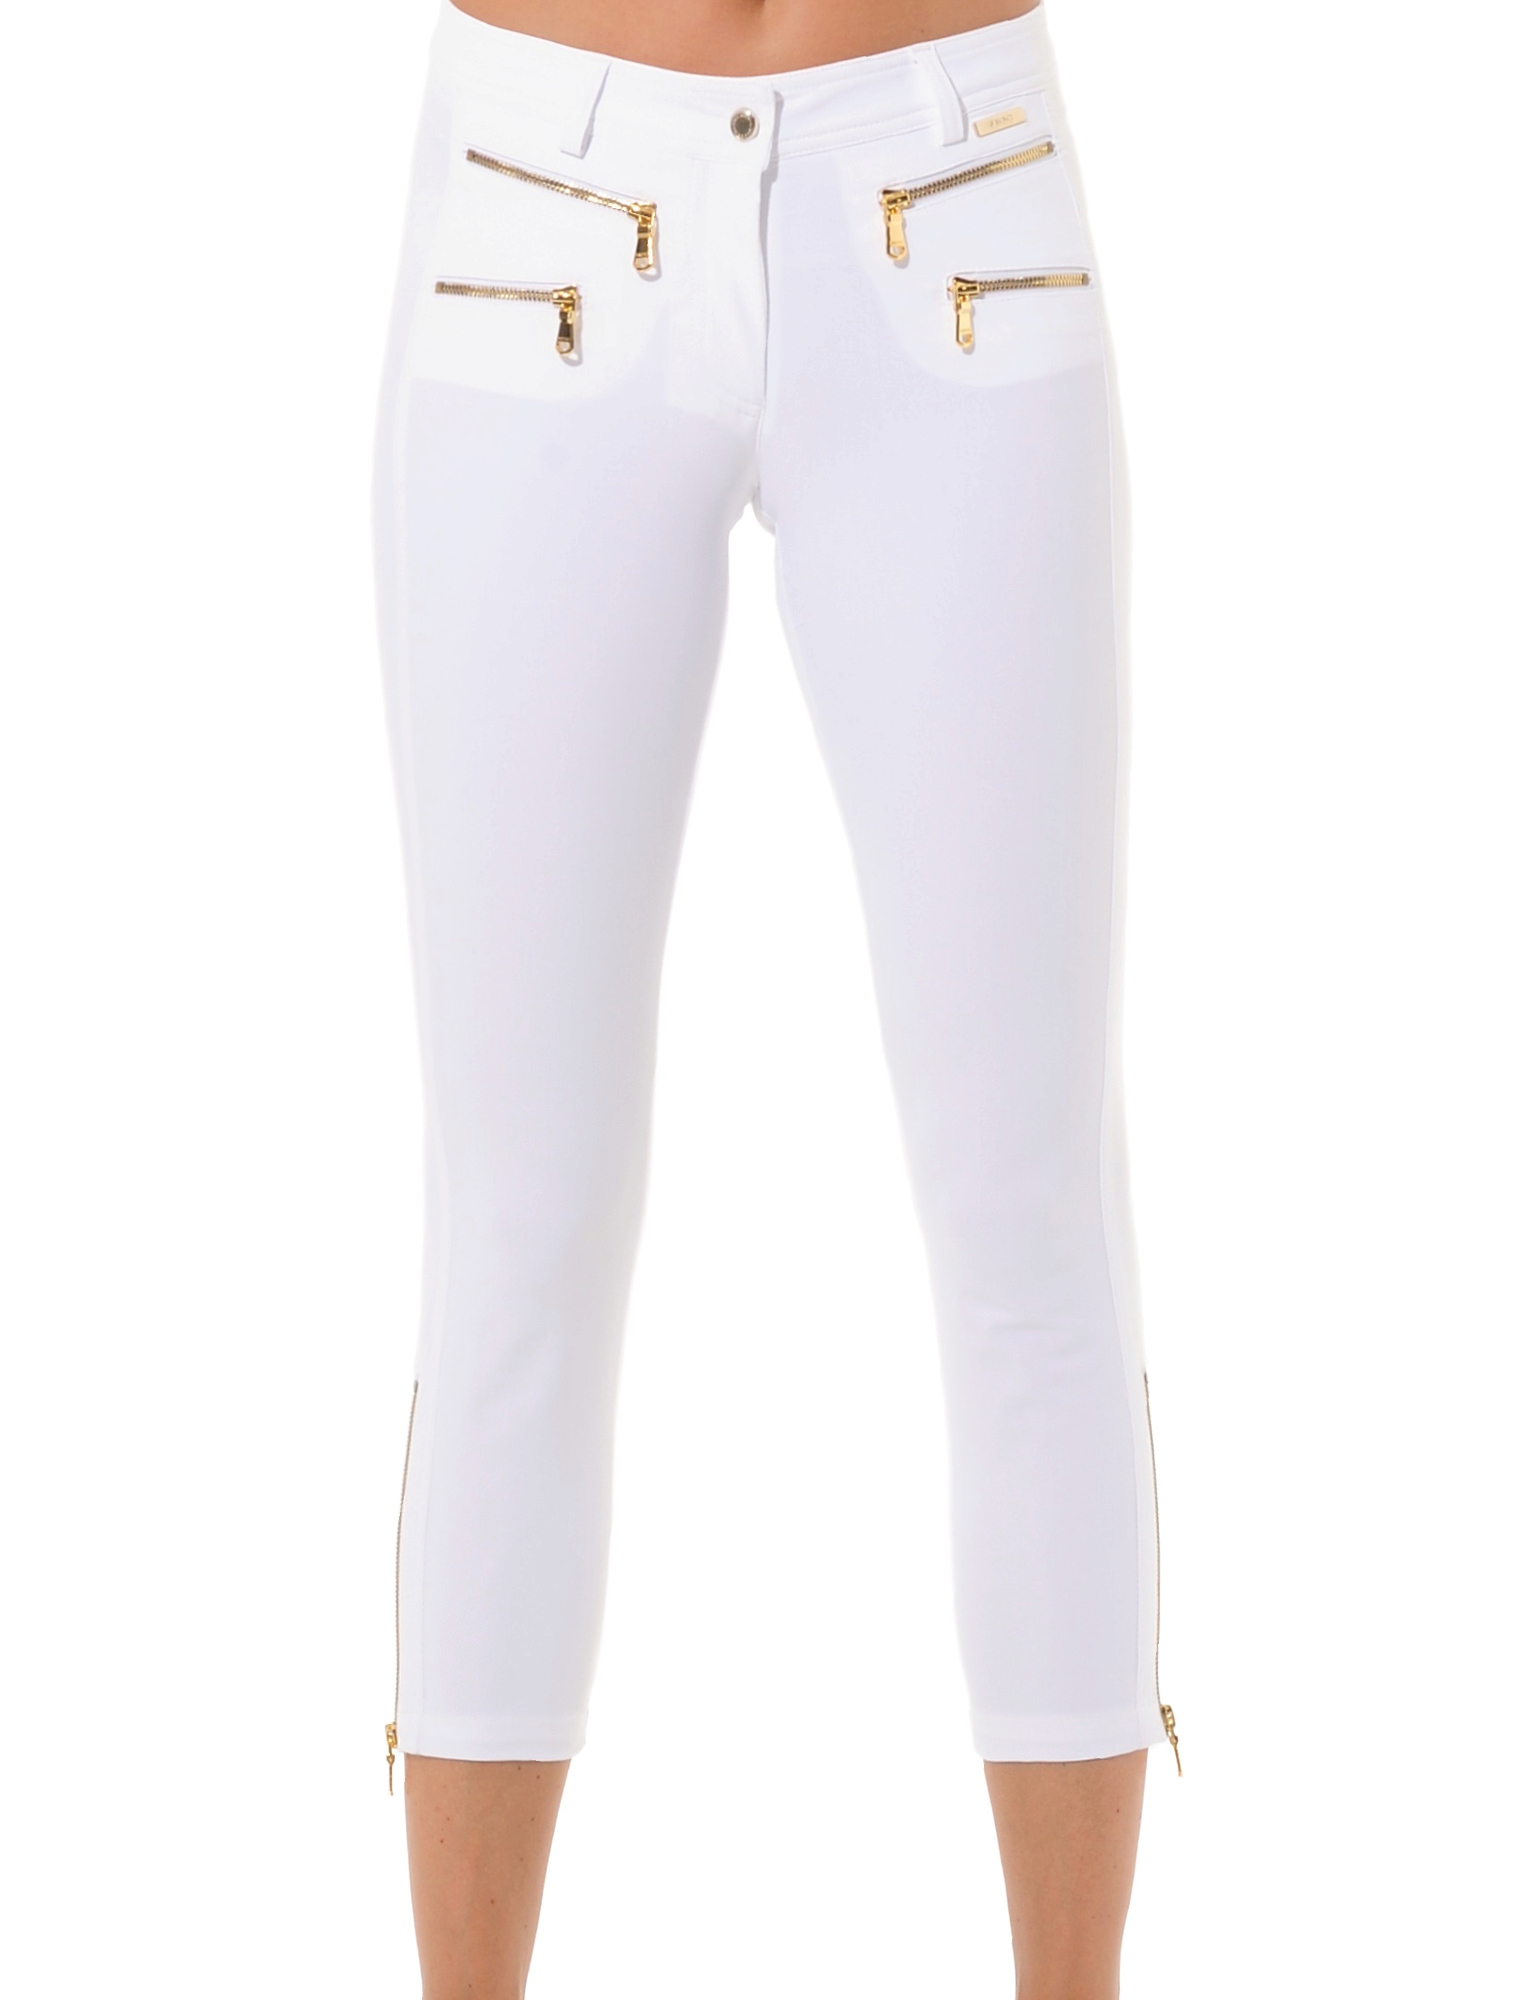 4way Stretch Shiny Gold Double Zip Cropped Pants white